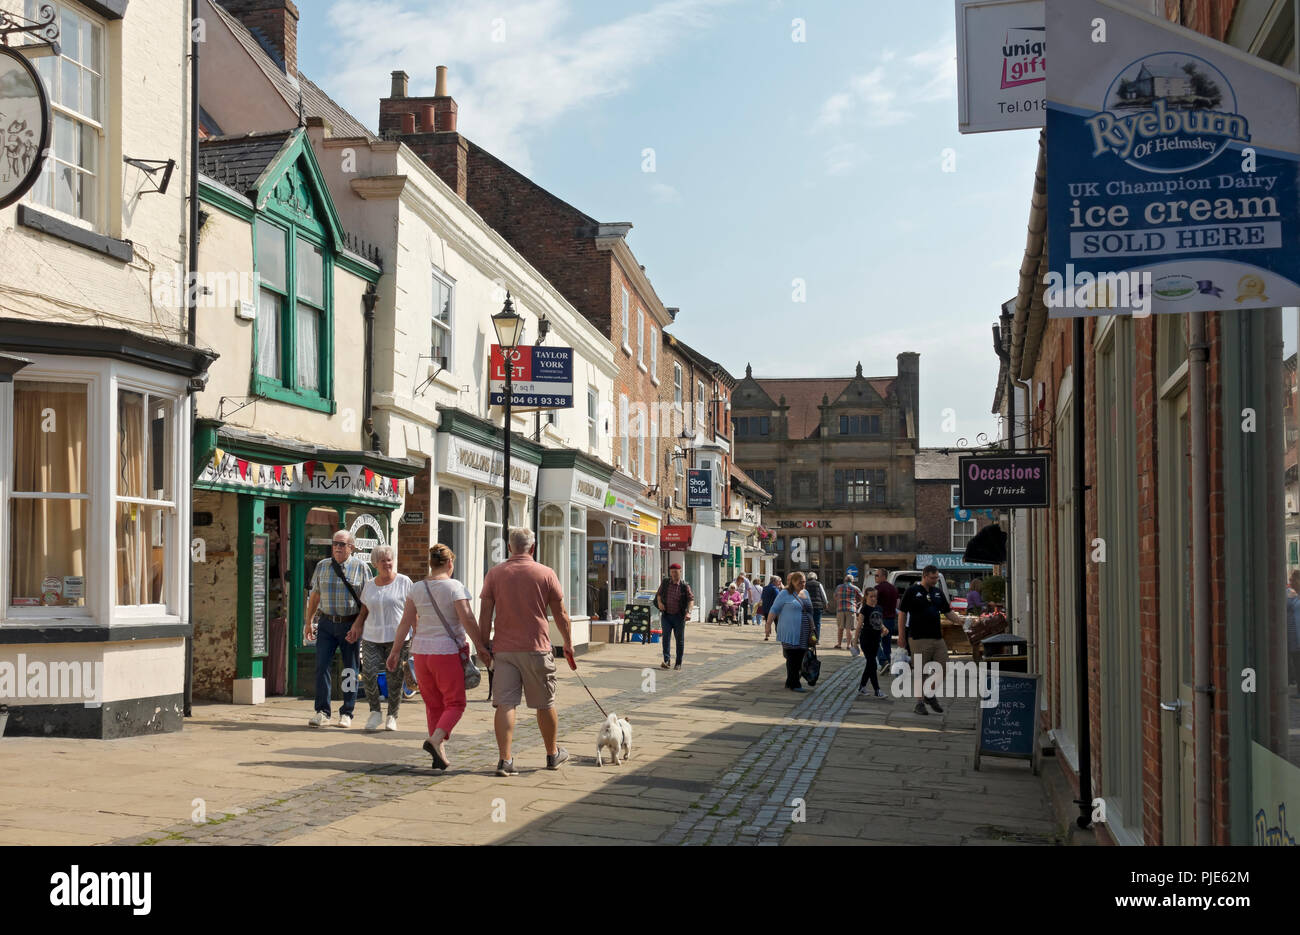 Shoppers people walking in the town centre in summer Market Place Thirsk North Yorkshire England UK United Kingdom GB Great Britain Stock Photo